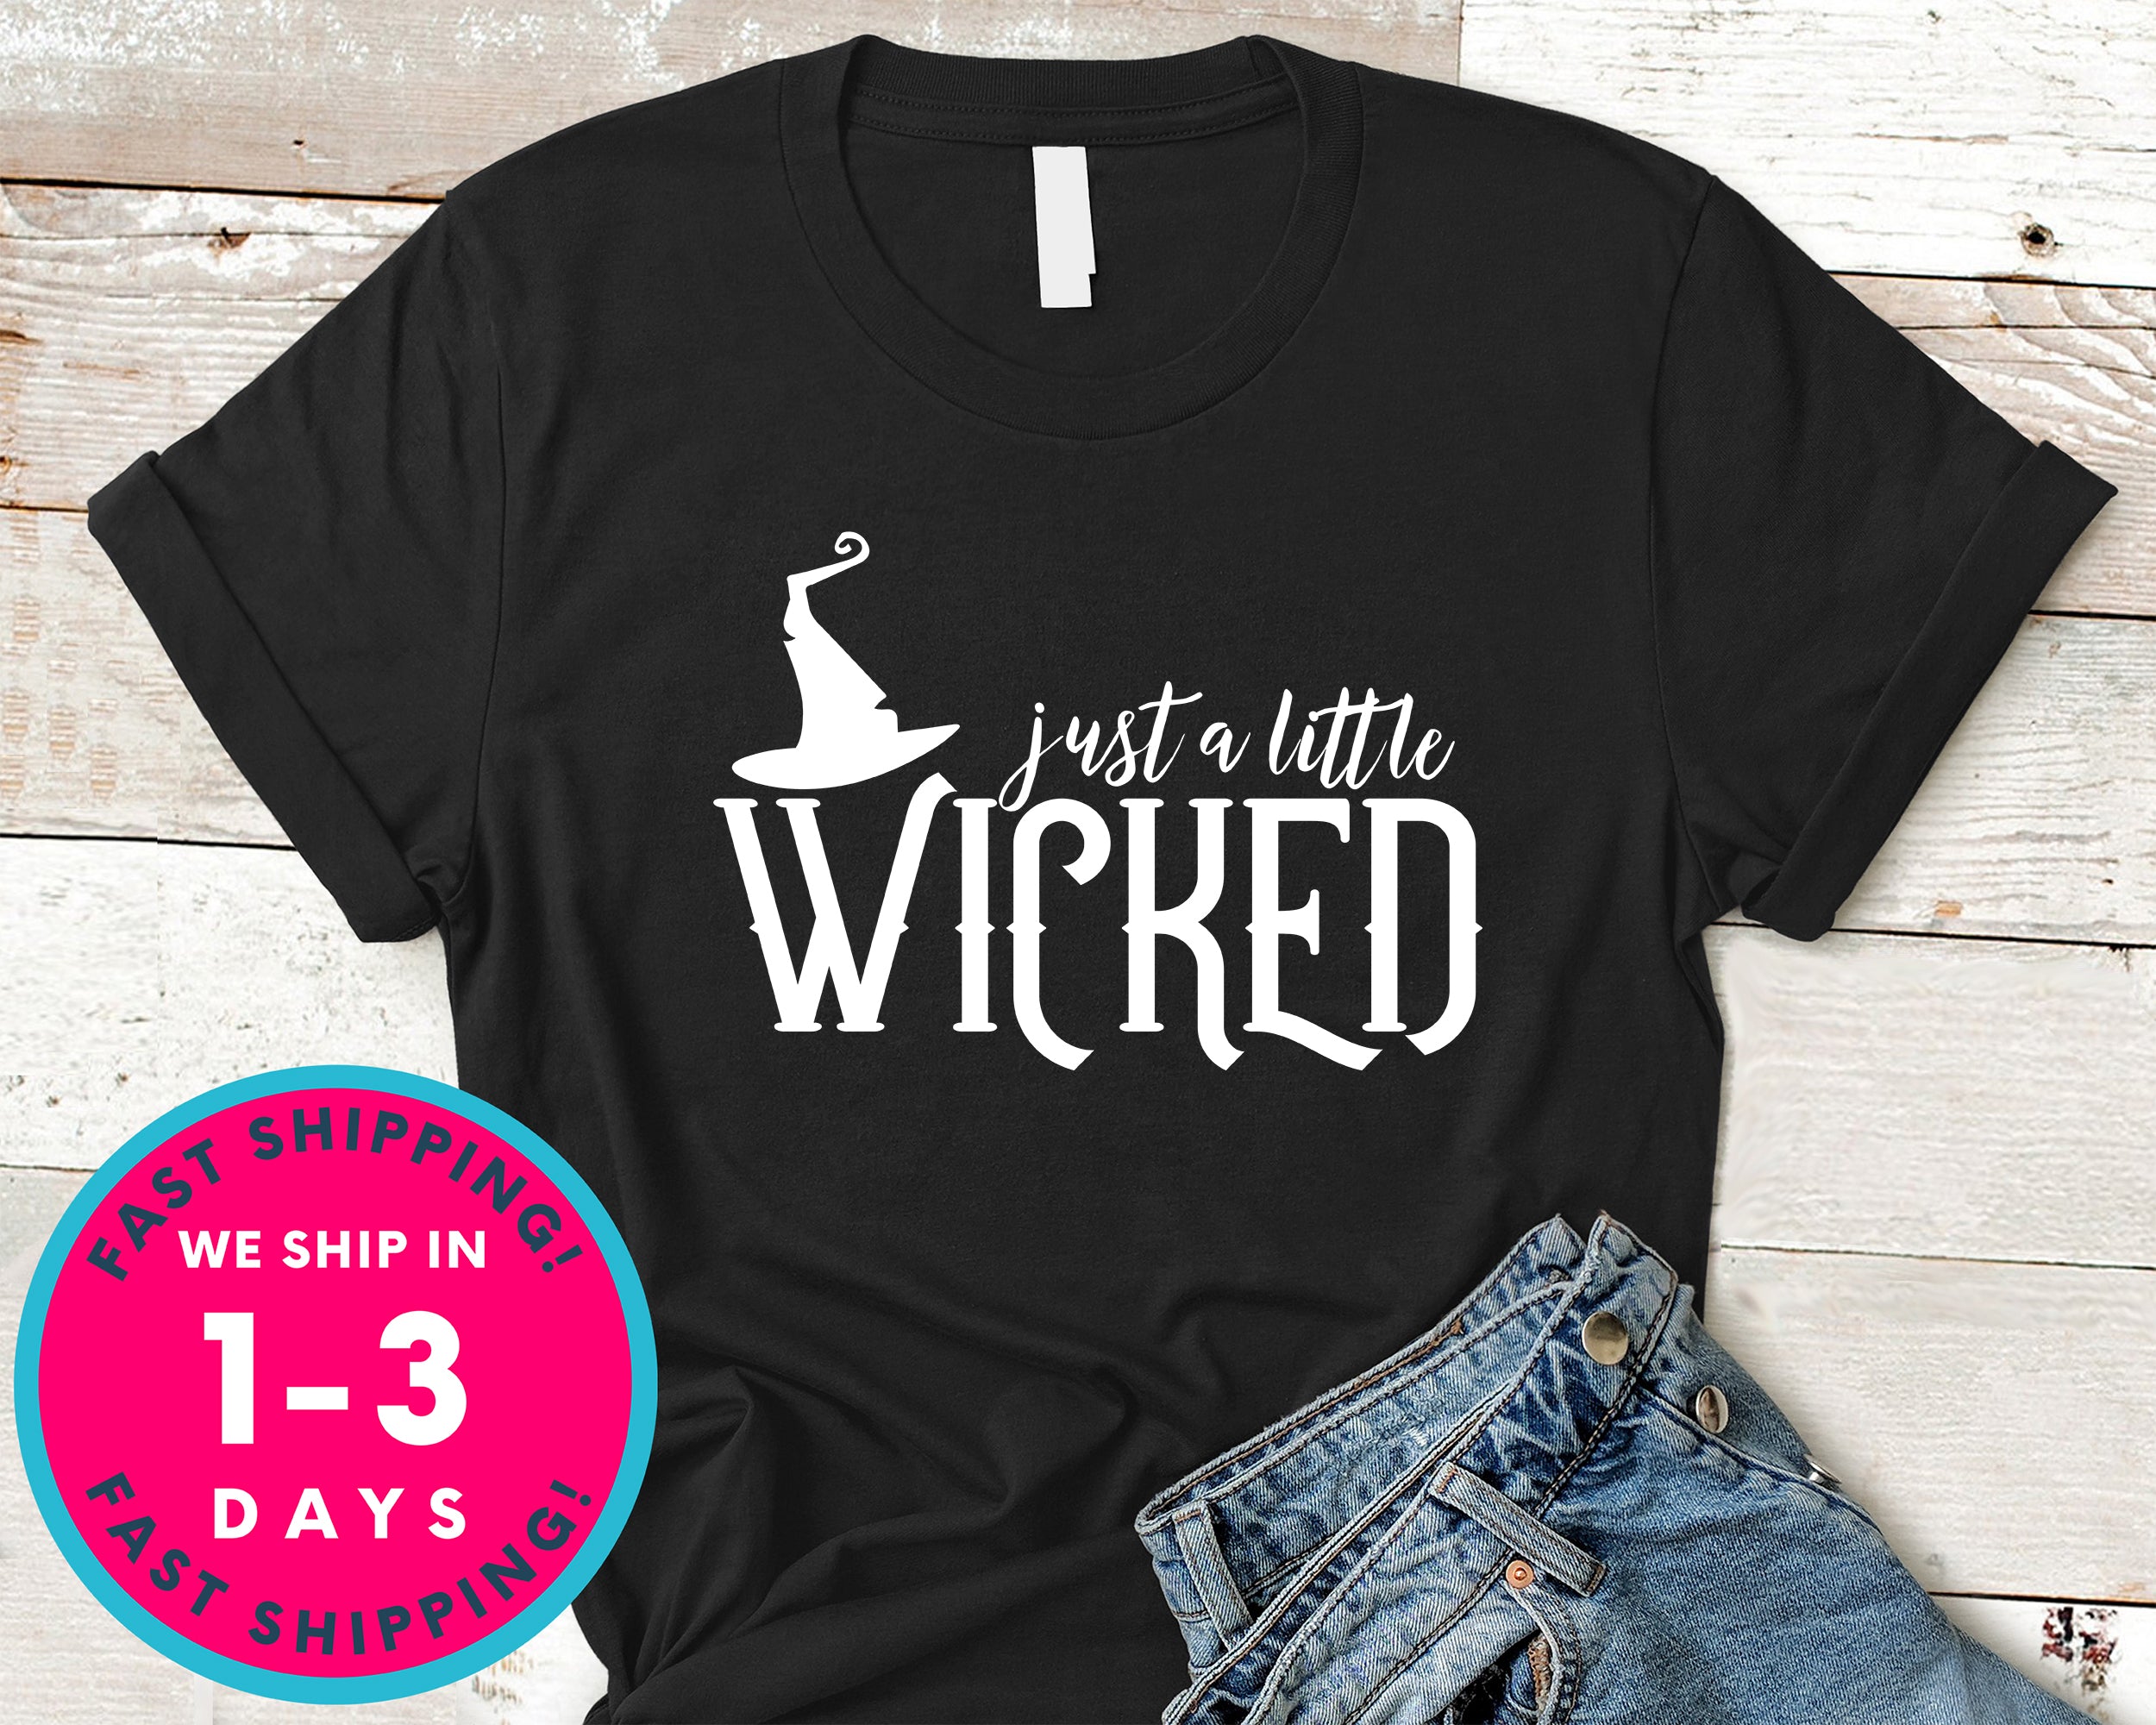 Just A Little Wicked T-Shirt - Halloween Horror Scary Shirt